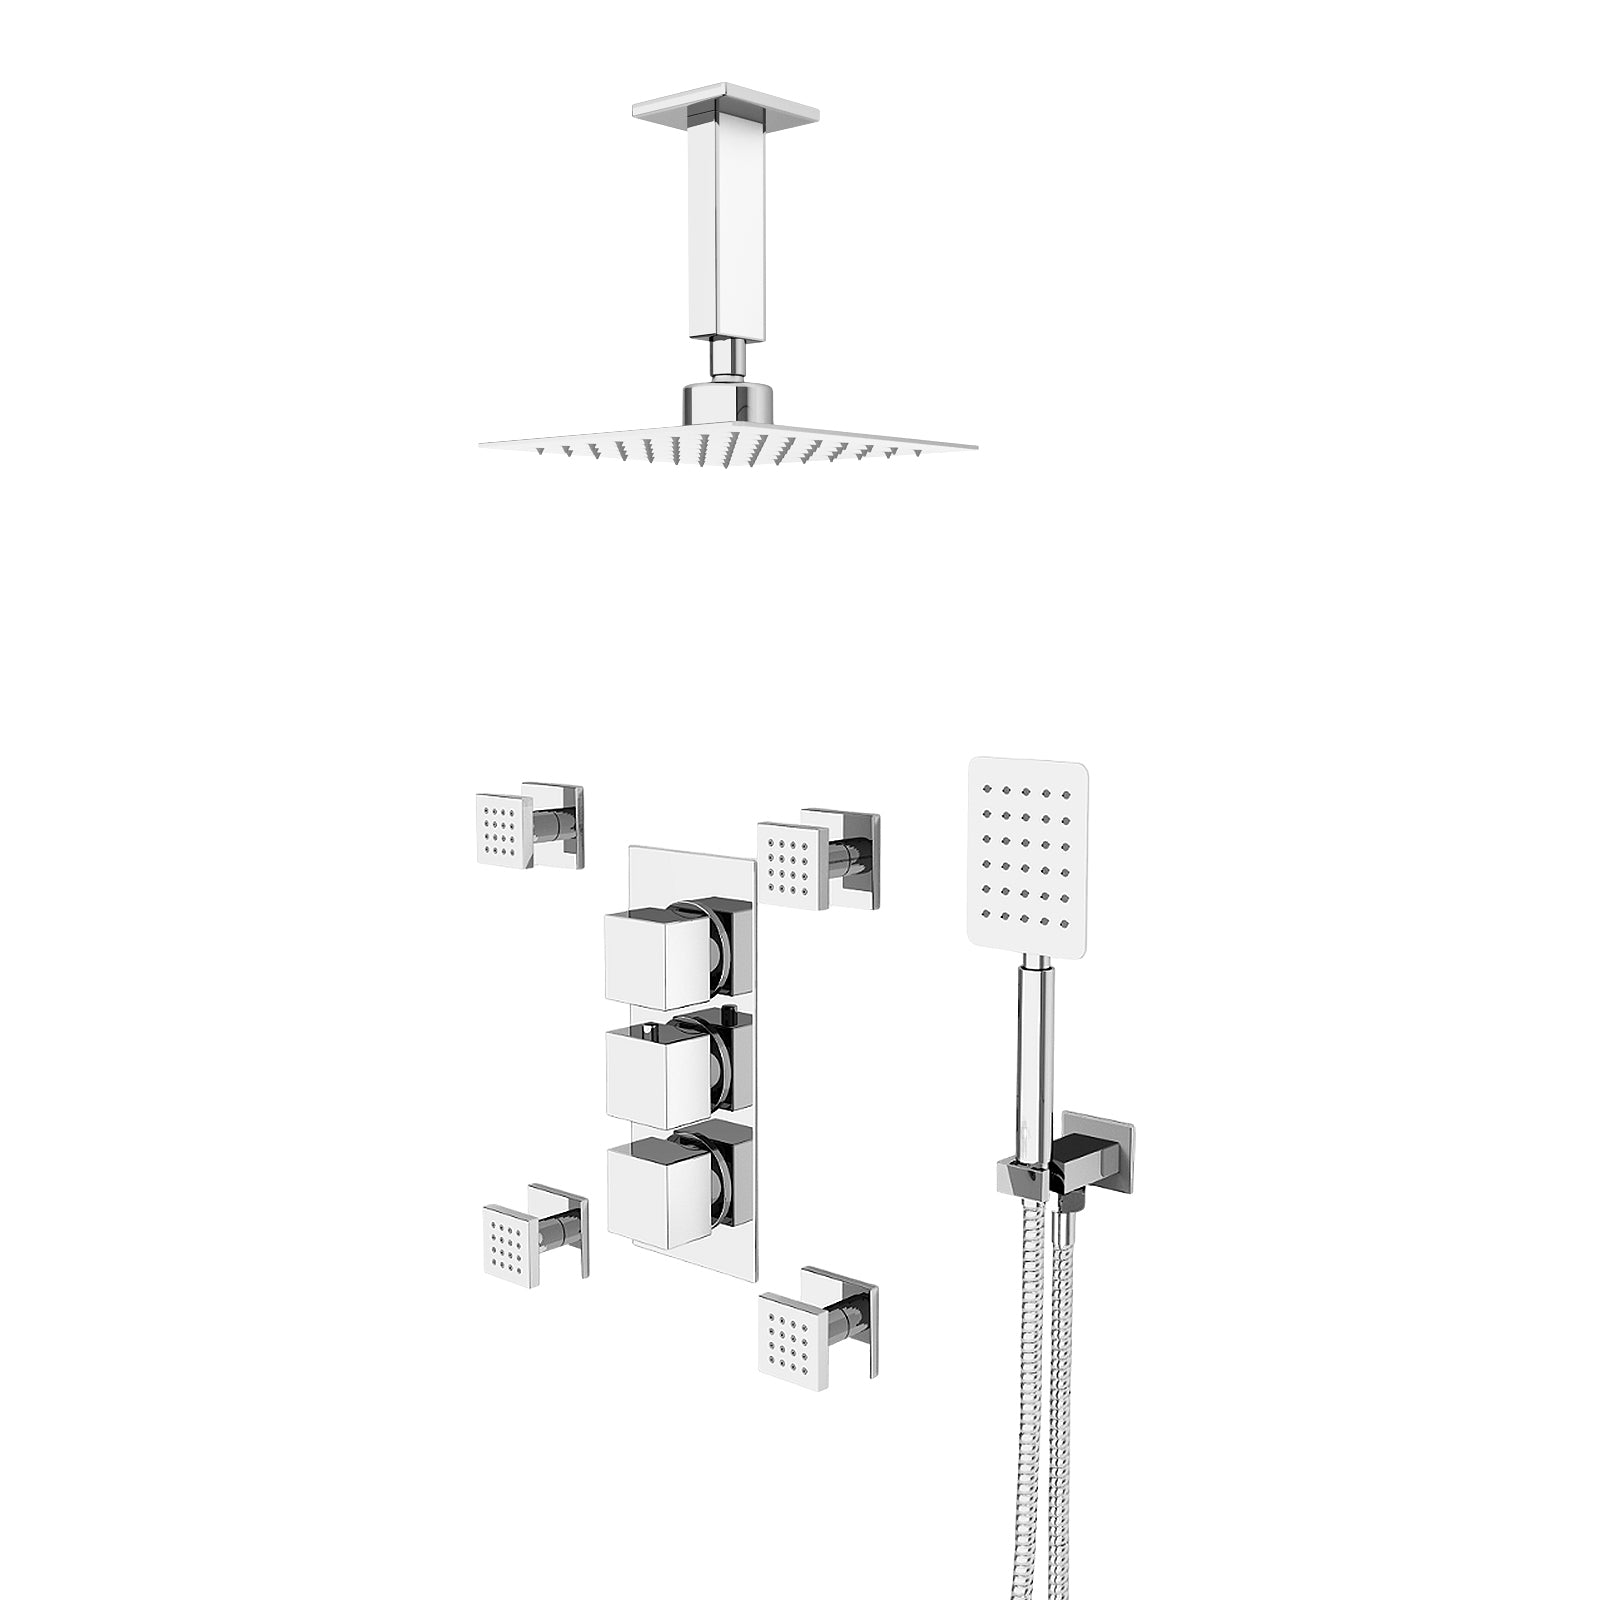 Olive Square 3 Way Concealed Thermostatic Shower Mixer Valve, Ceiling Shower Head, Handset, 4x Body Jets Set Chrome